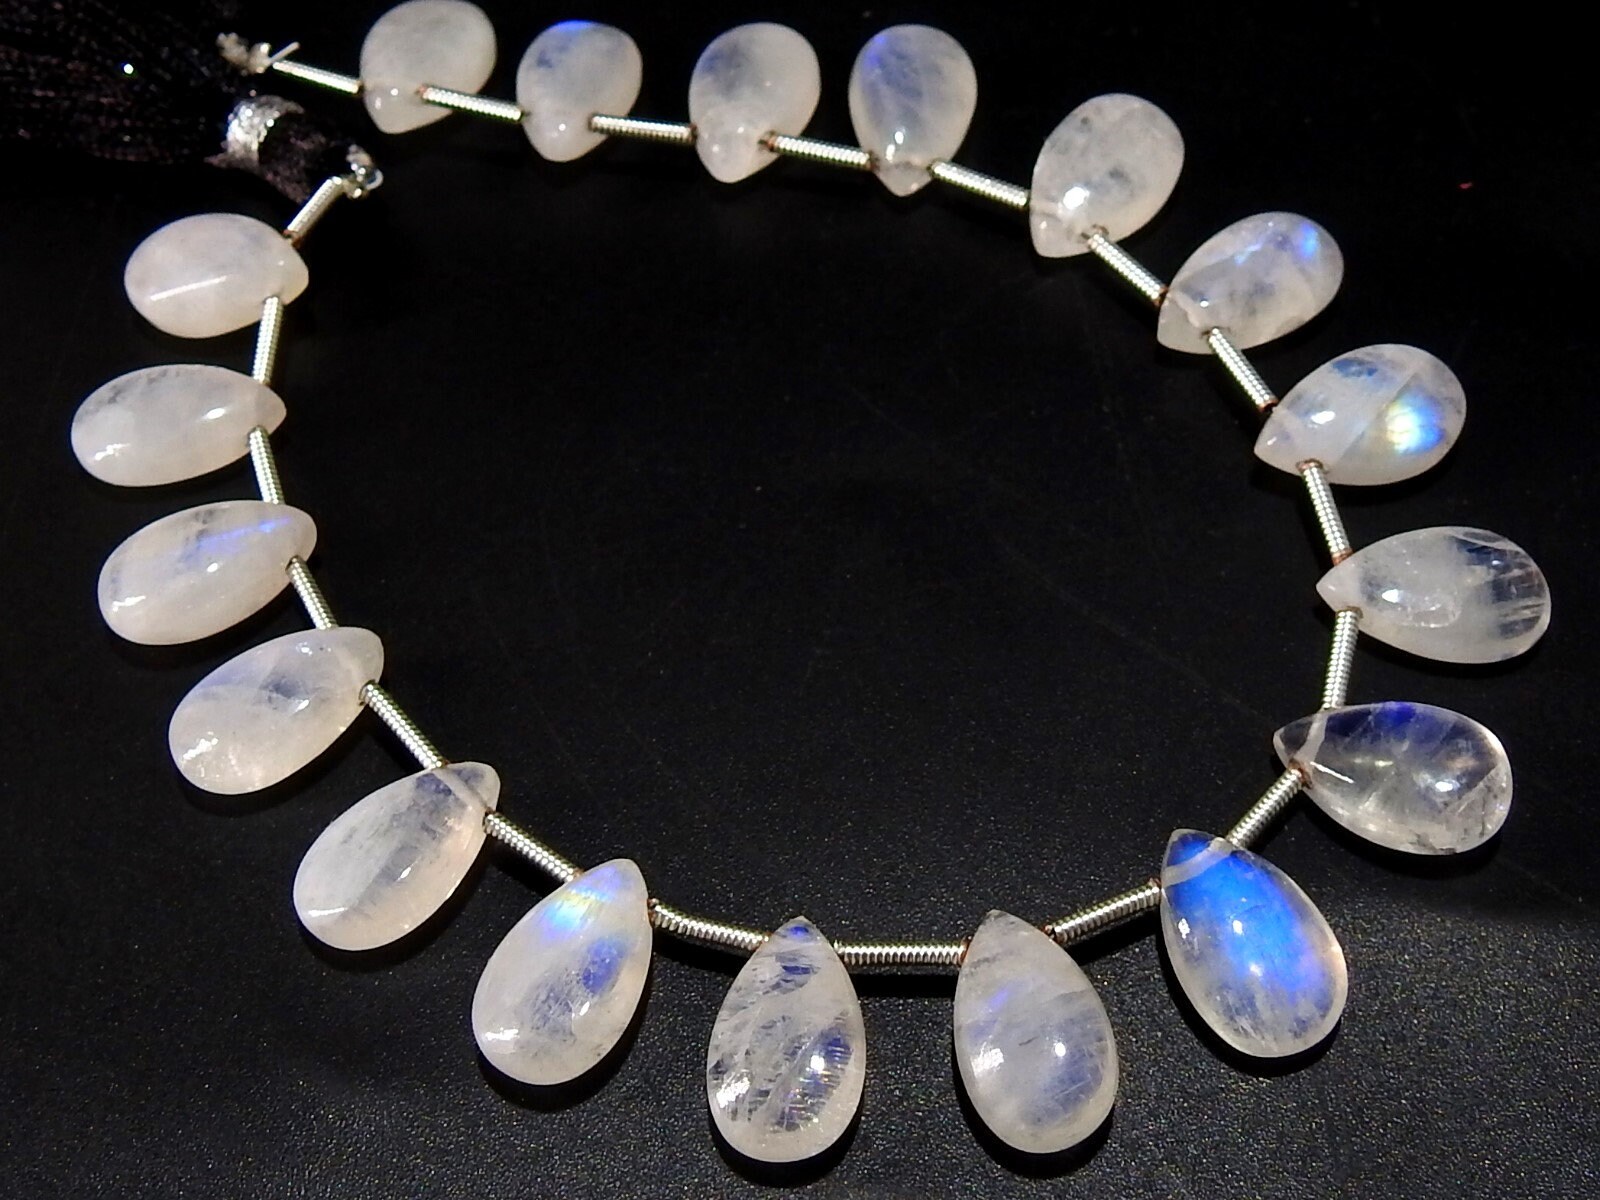 White Rainbow Moonstone Smooth Teardrop,Blue Flashy Fire,Loose Stone,Bead,Calibrated Size,Making Jewelry 9Matched Pair 13X8MM Approx PME-CY3 | Save 33% - Rajasthan Living 13